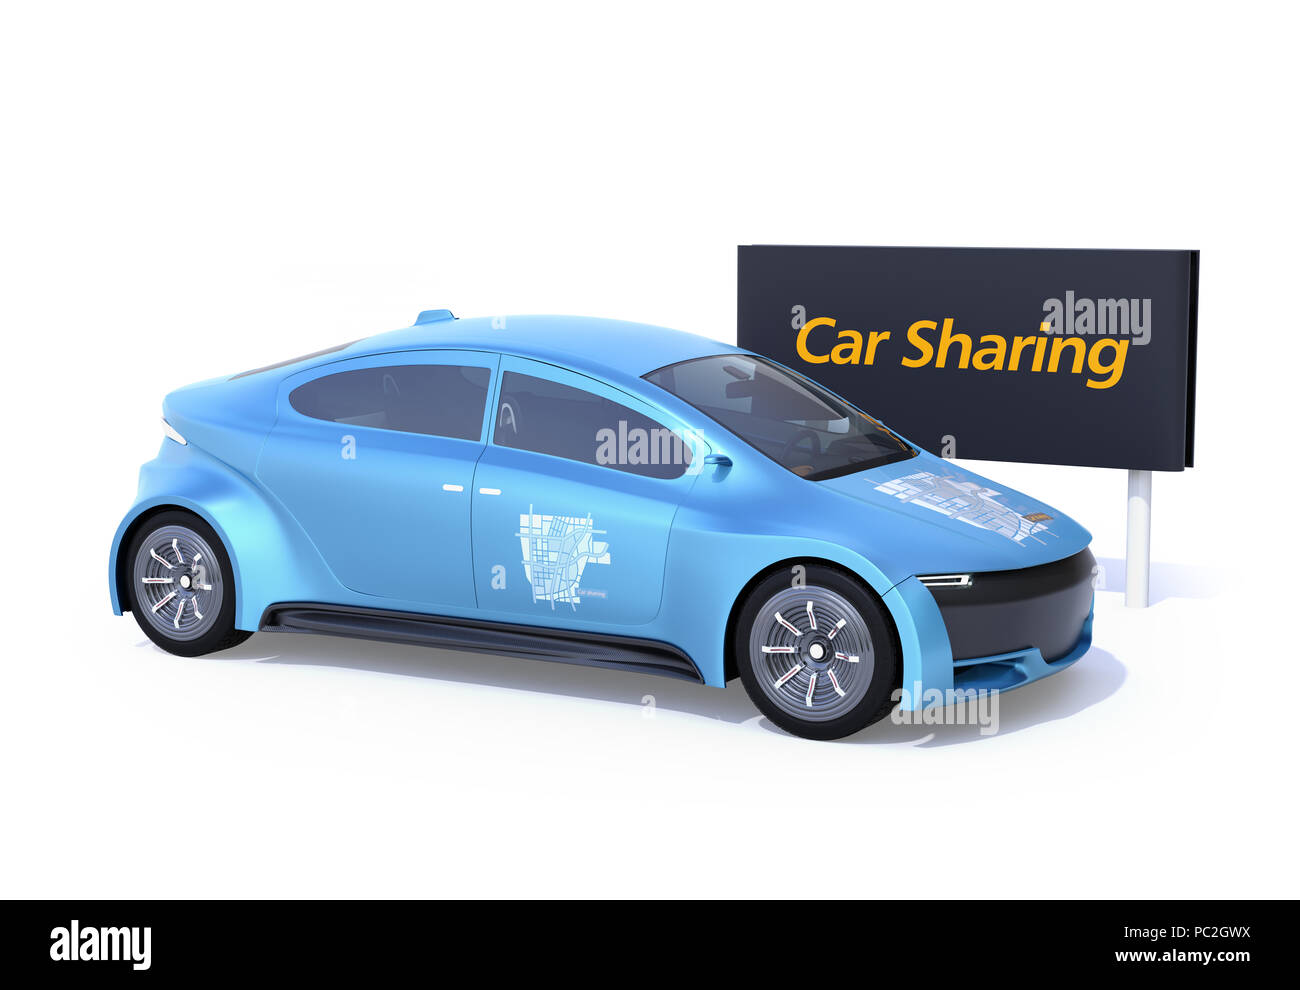 Side view of metallic blue electric car and car sharing billboard on white background. Car sharing concept. 3D rendering image. Stock Photo